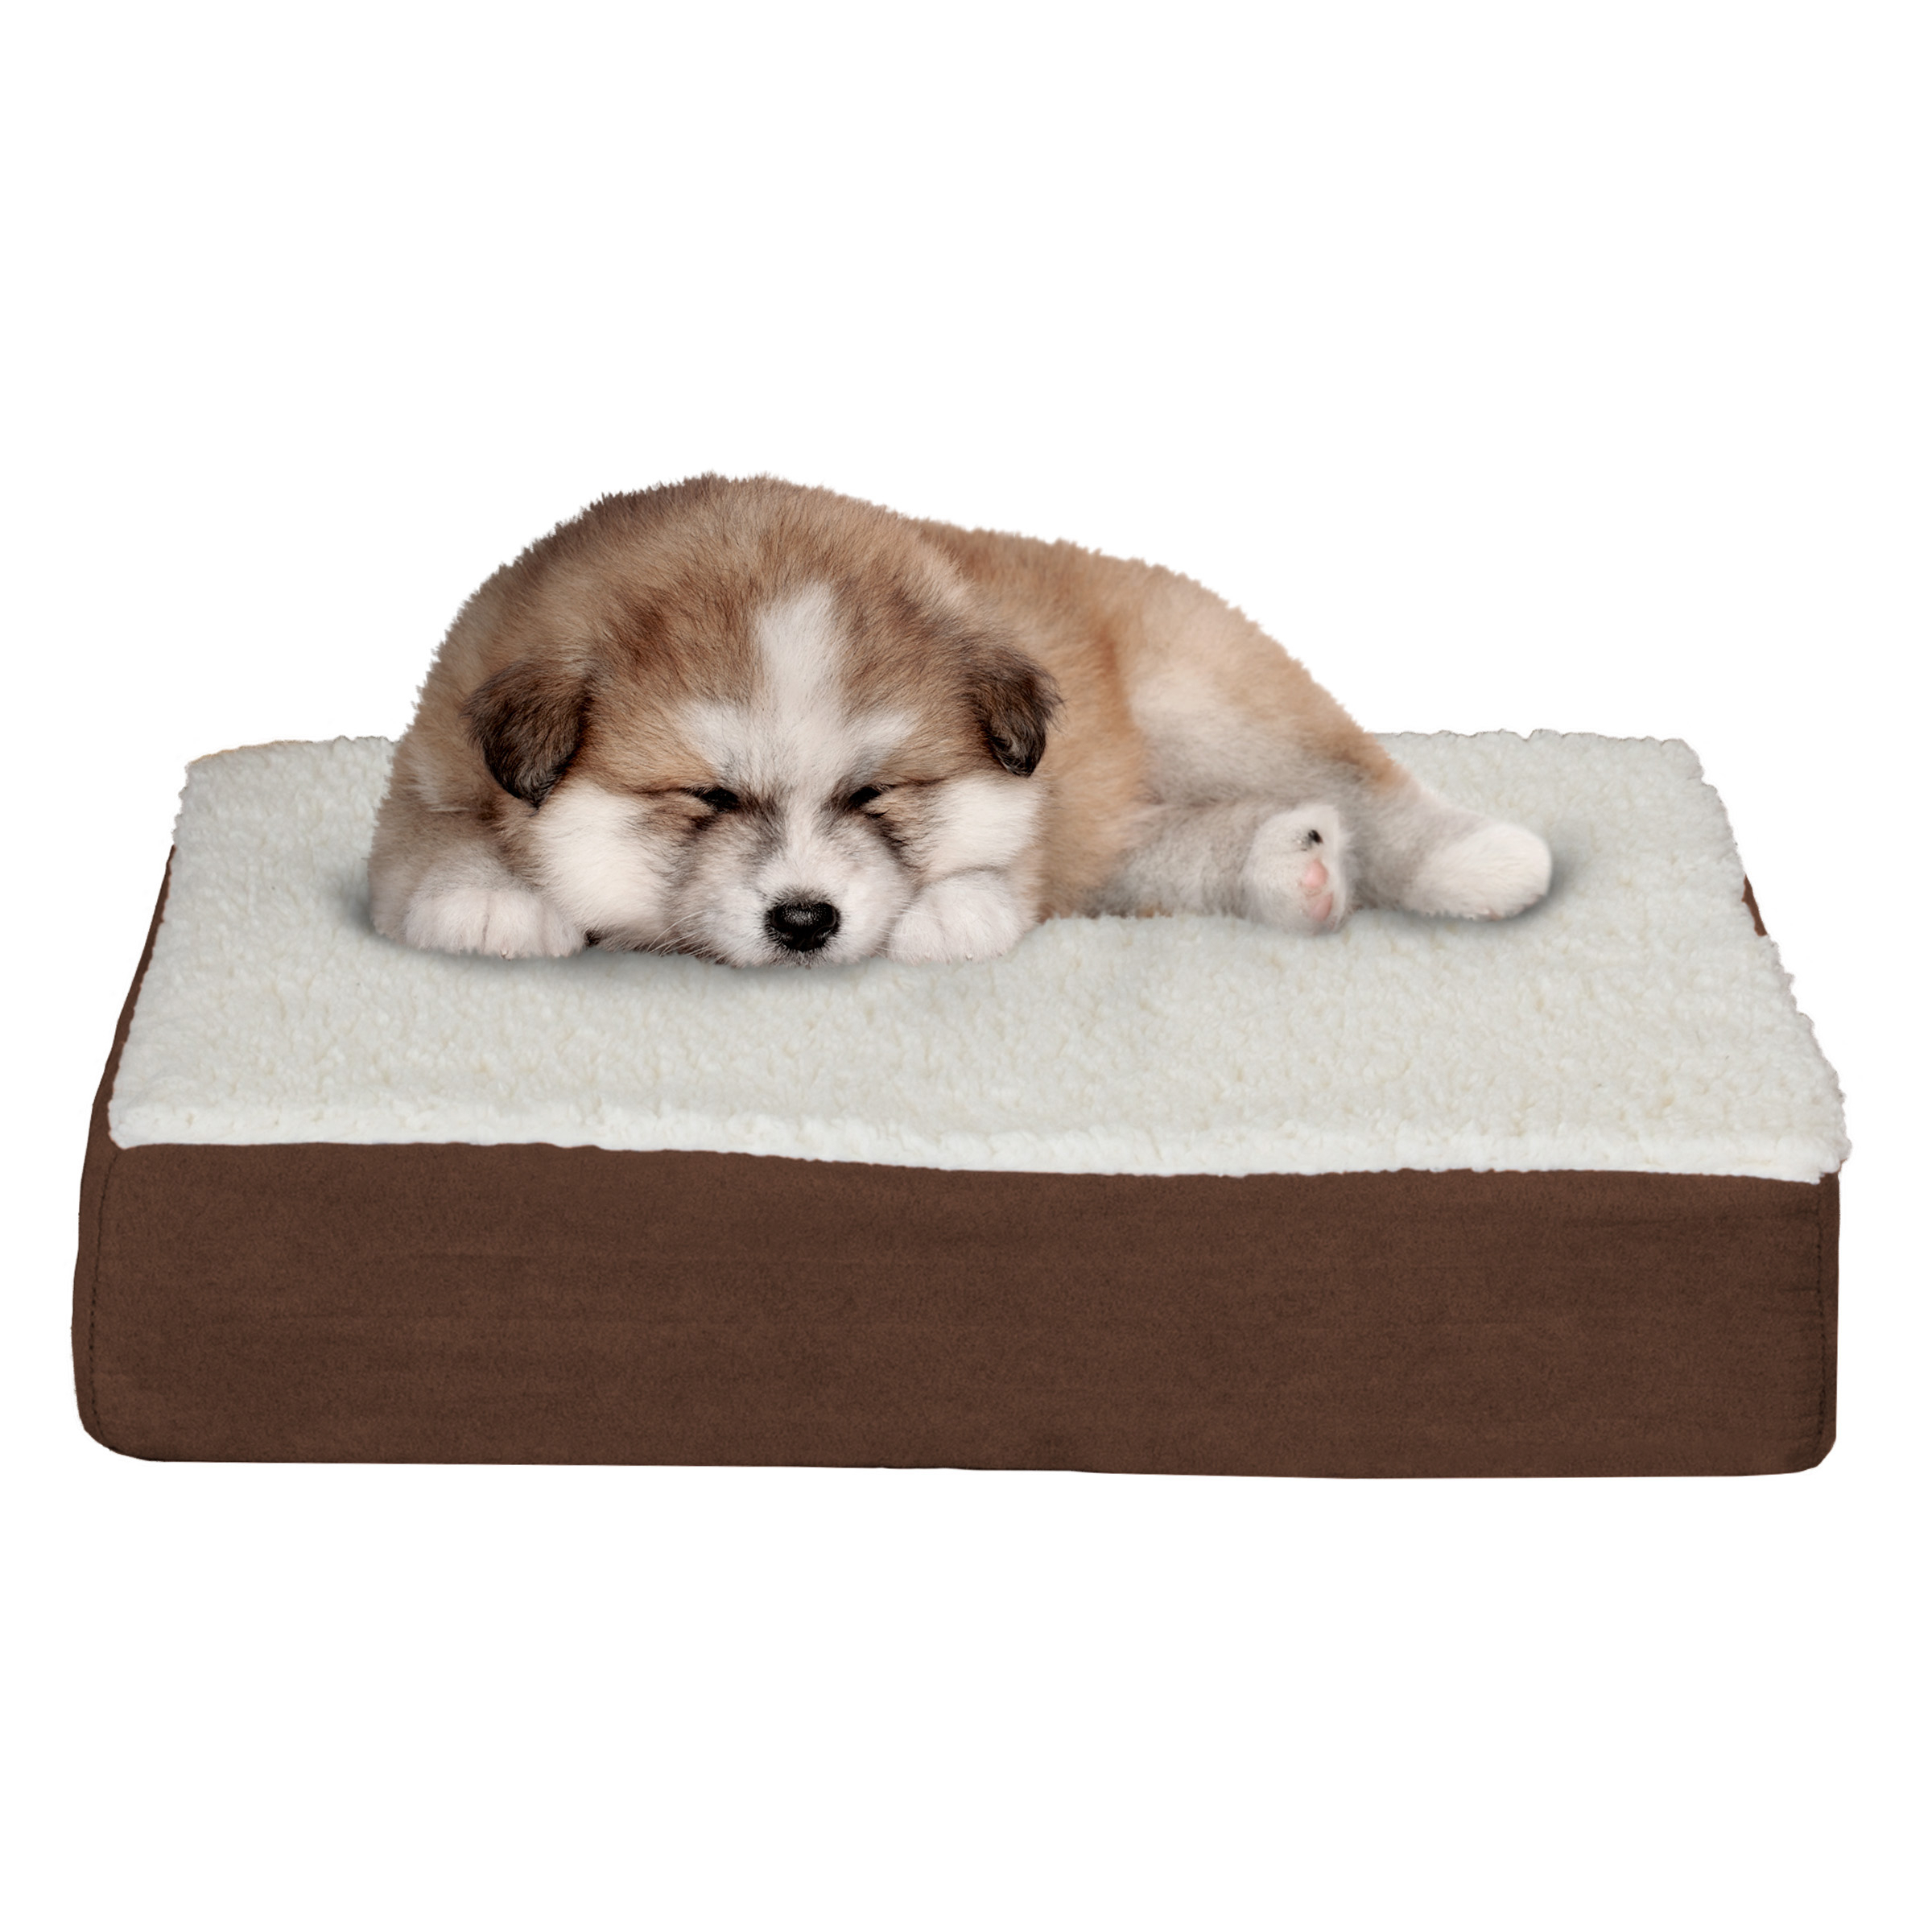 Orthopedic Dog Bed Memory Foam Cozy Sherpa 20 X 15 X 4 Washable Cover - Brown